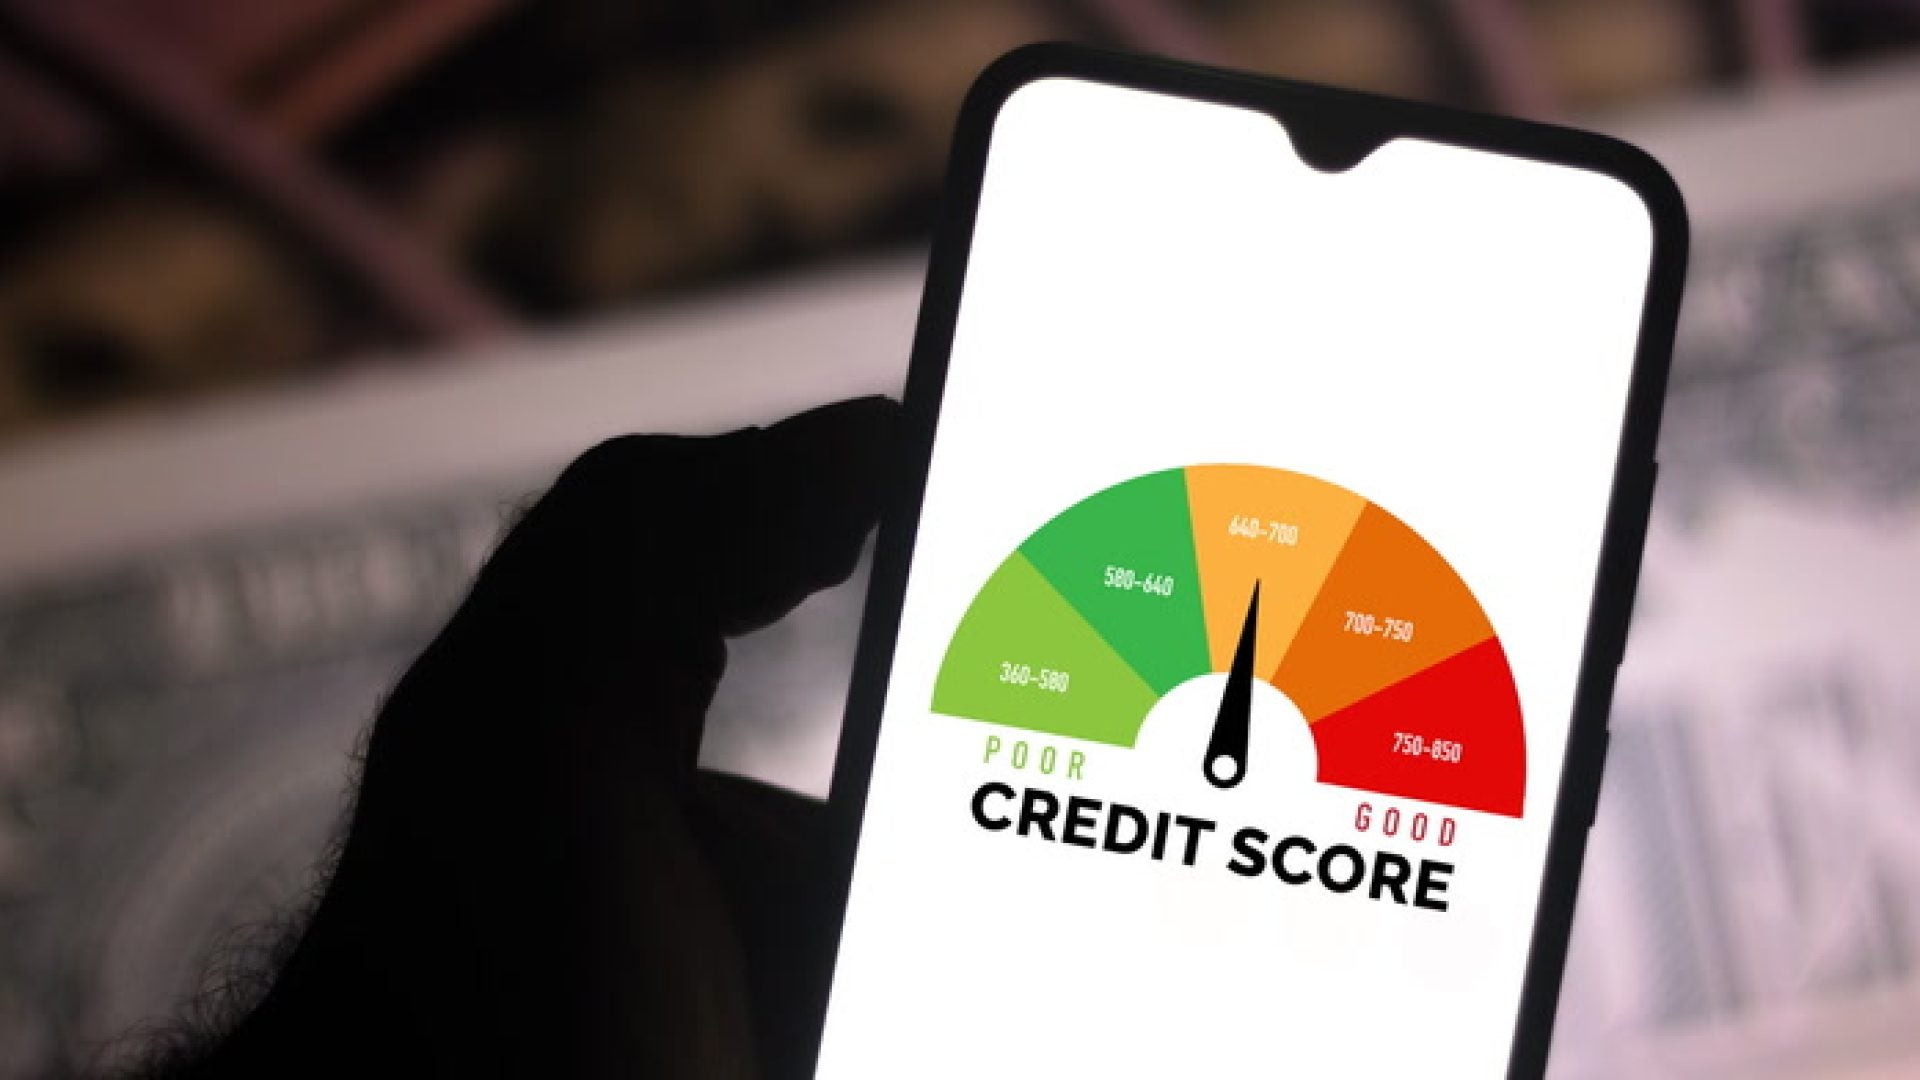 WATCH: Here Are 5 Ways to Boost Your Credit Score